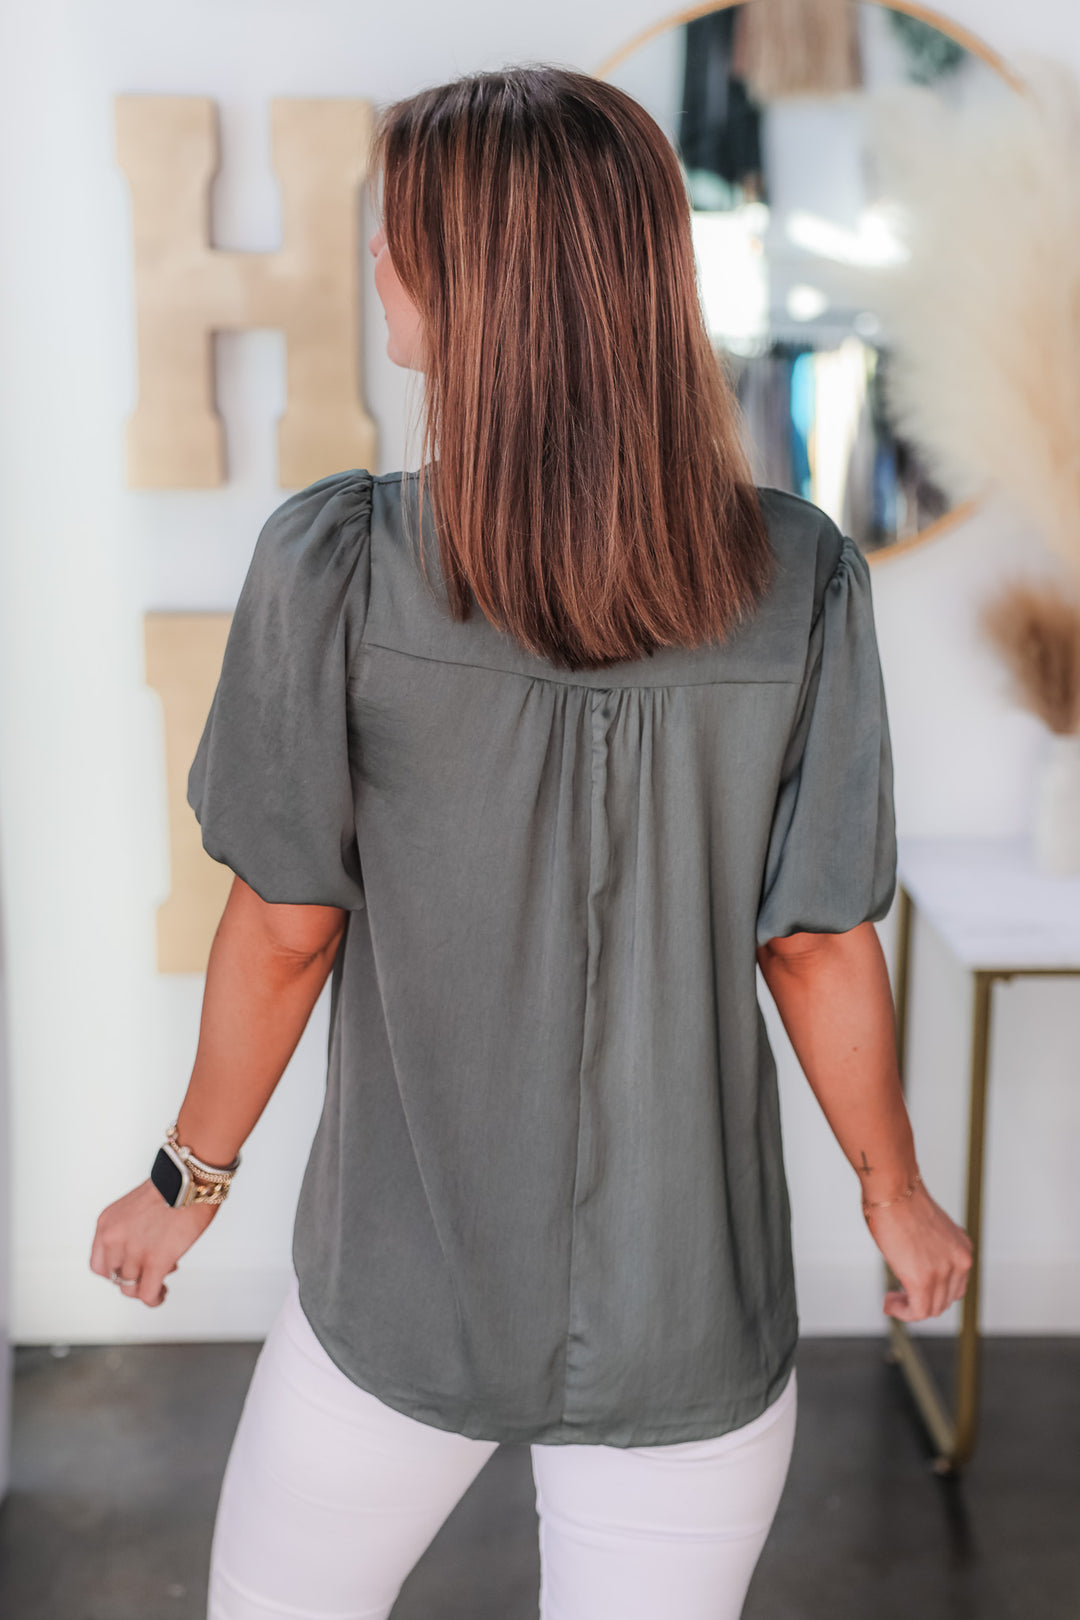 A brunette woman standing in a shop wearing an ash green, short bubble sleeve, v neck top with white jeans. She is rear facing.